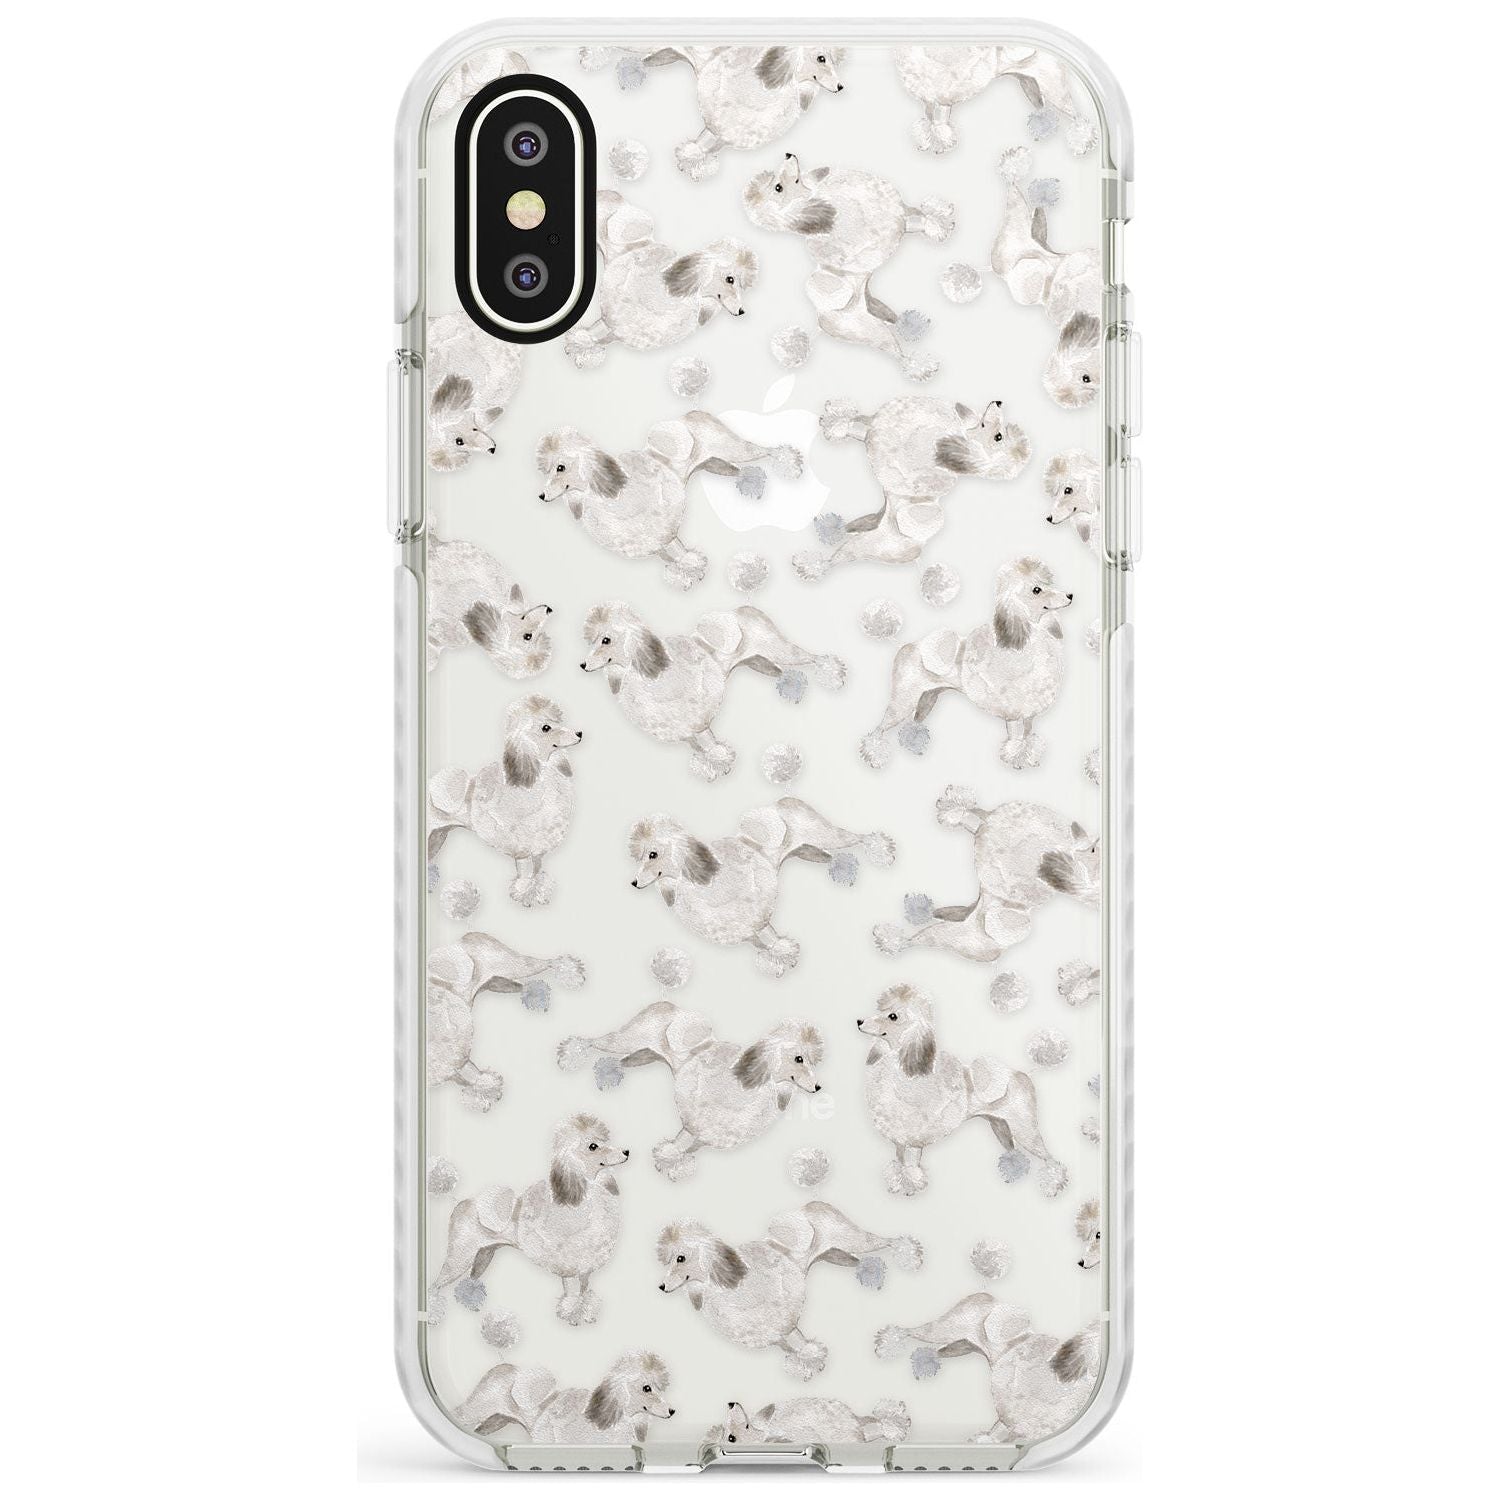 Poodle (White) Watercolour Dog Pattern Impact Phone Case for iPhone X XS Max XR